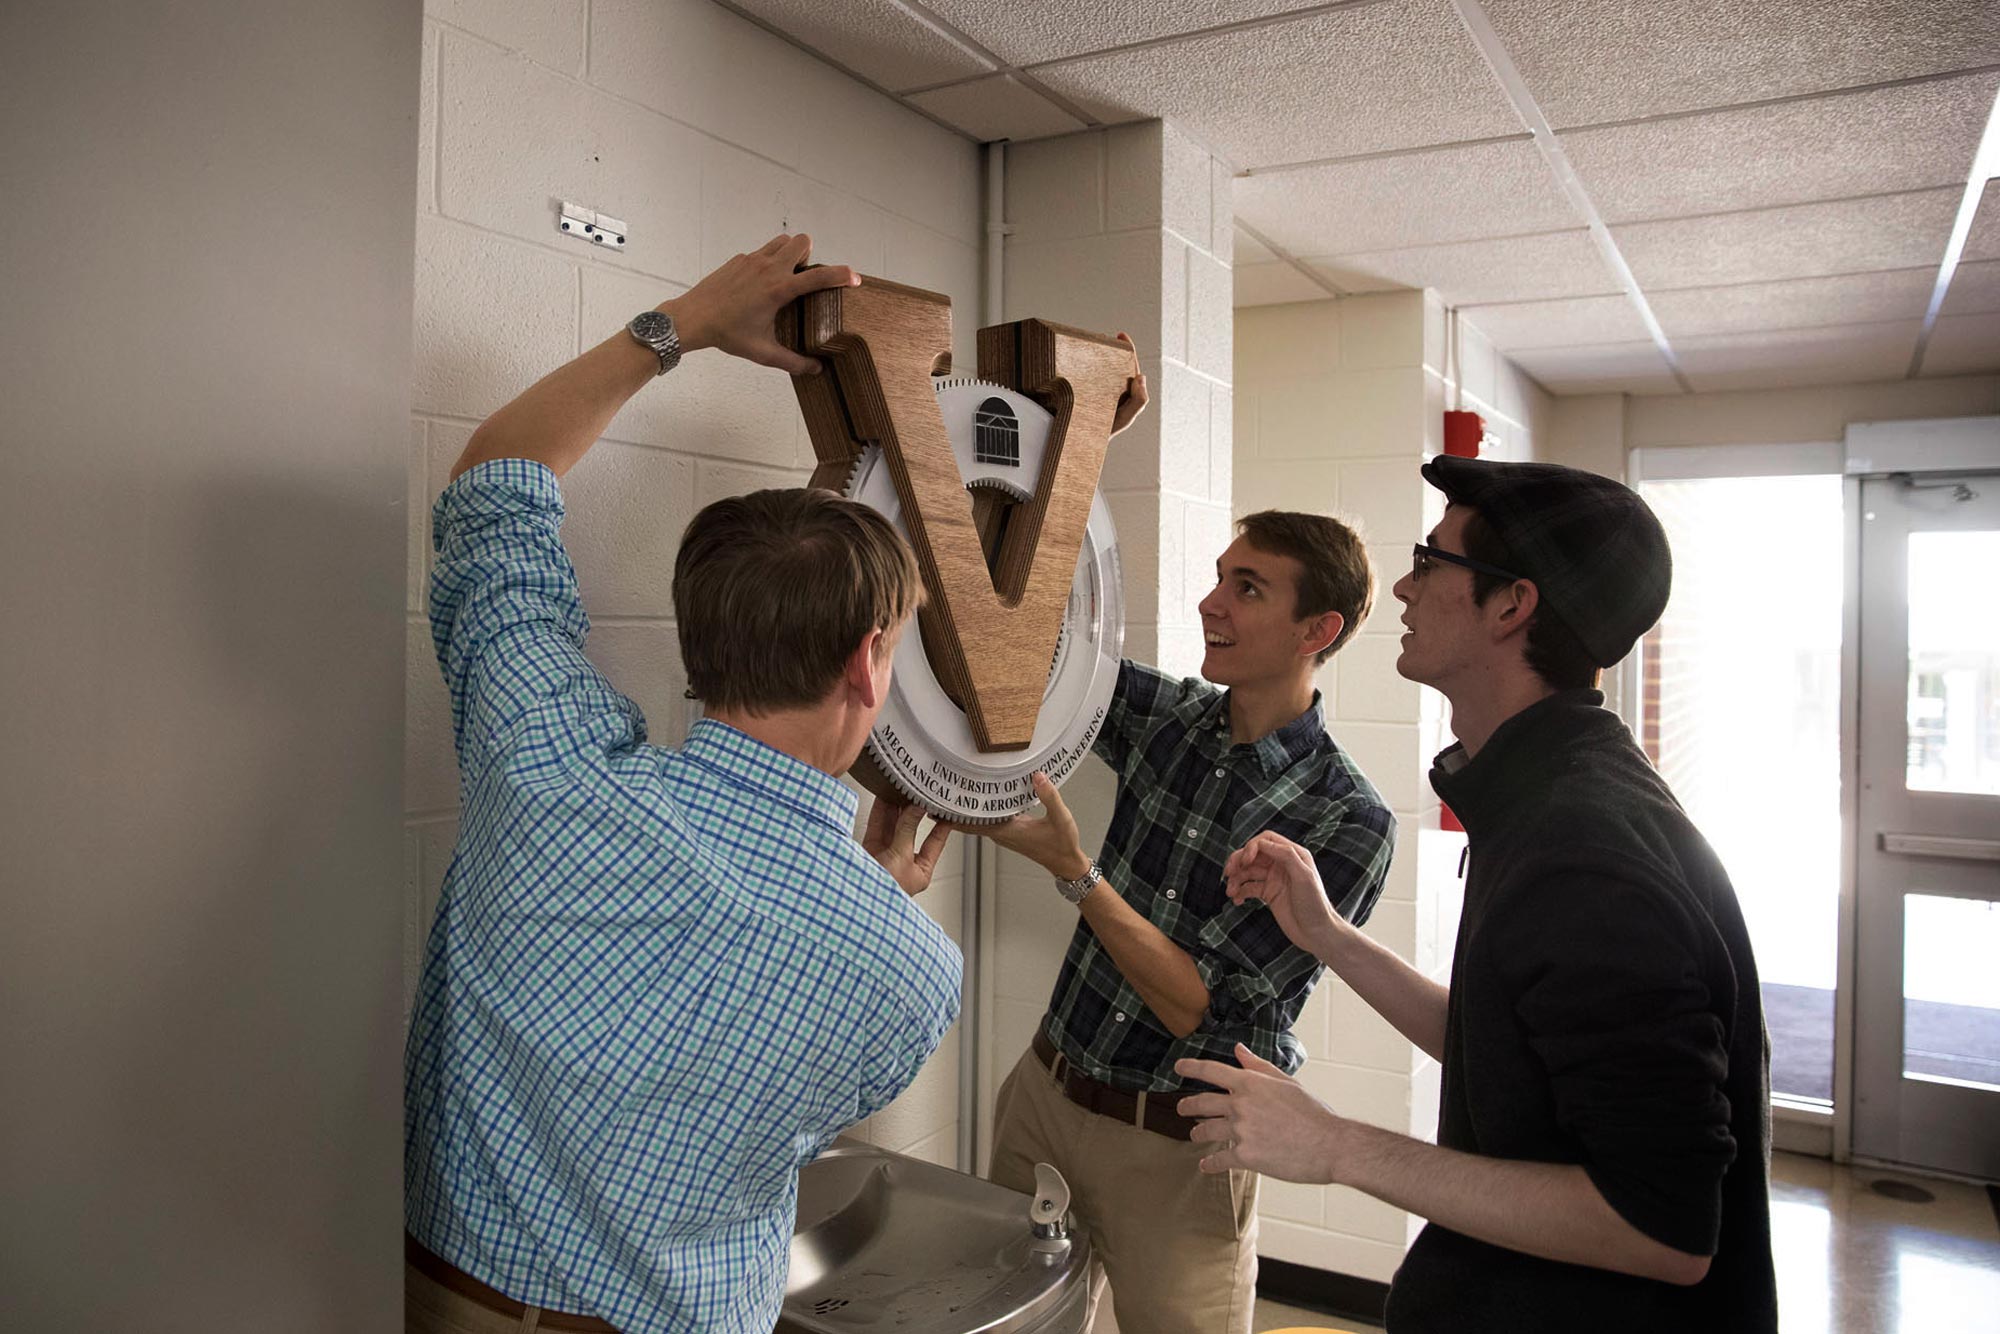 Three students hanging a clock in a hallway over a waterfountain